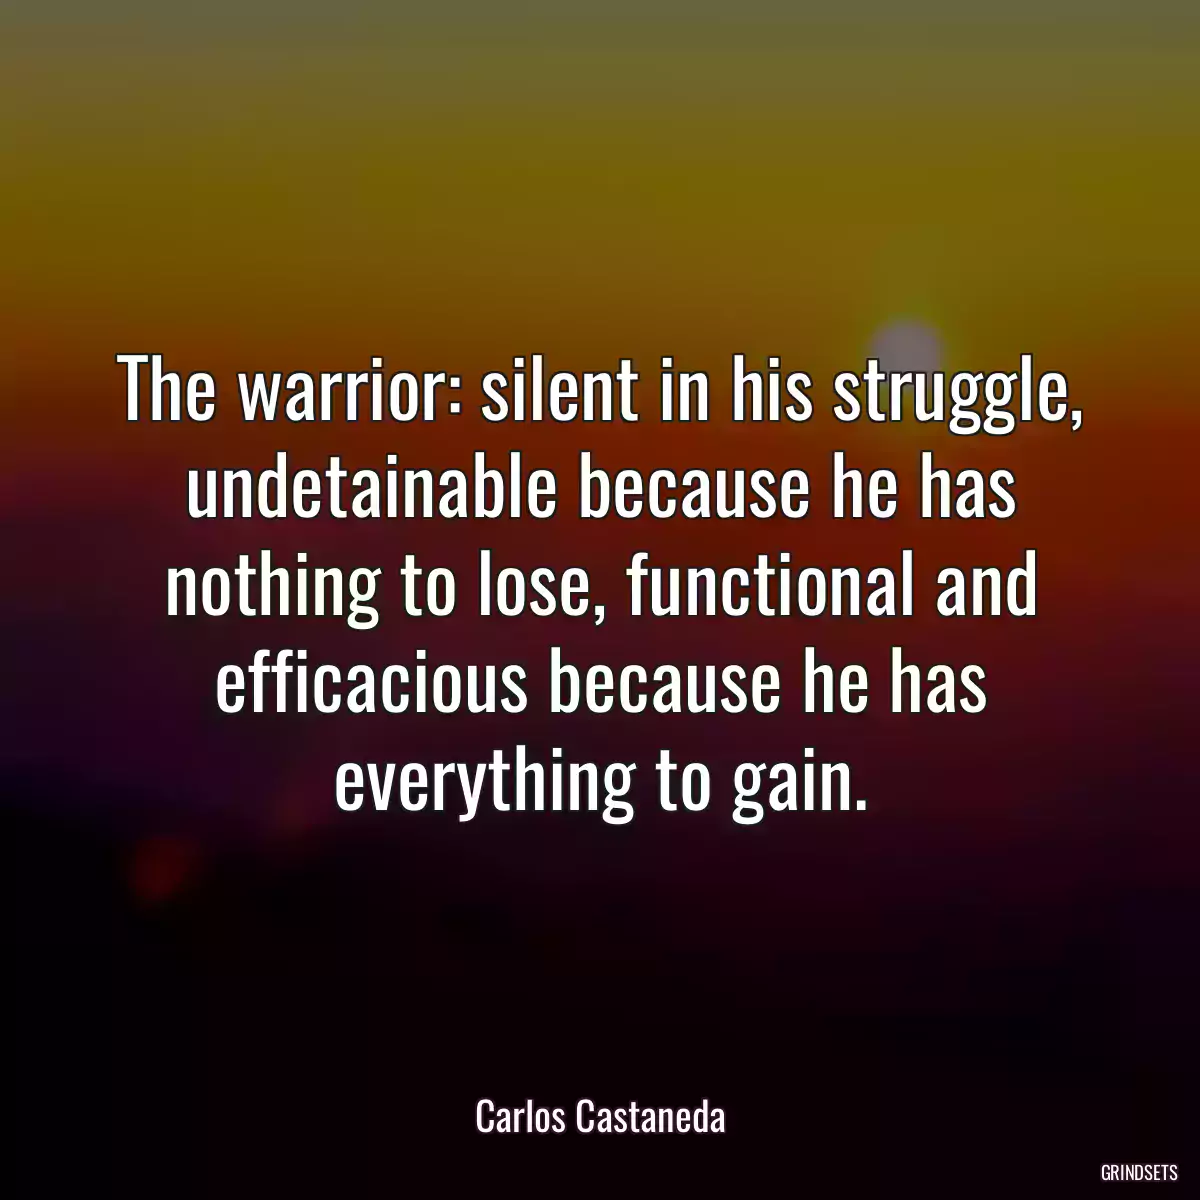 The warrior: silent in his struggle, undetainable because he has nothing to lose, functional and efficacious because he has everything to gain.